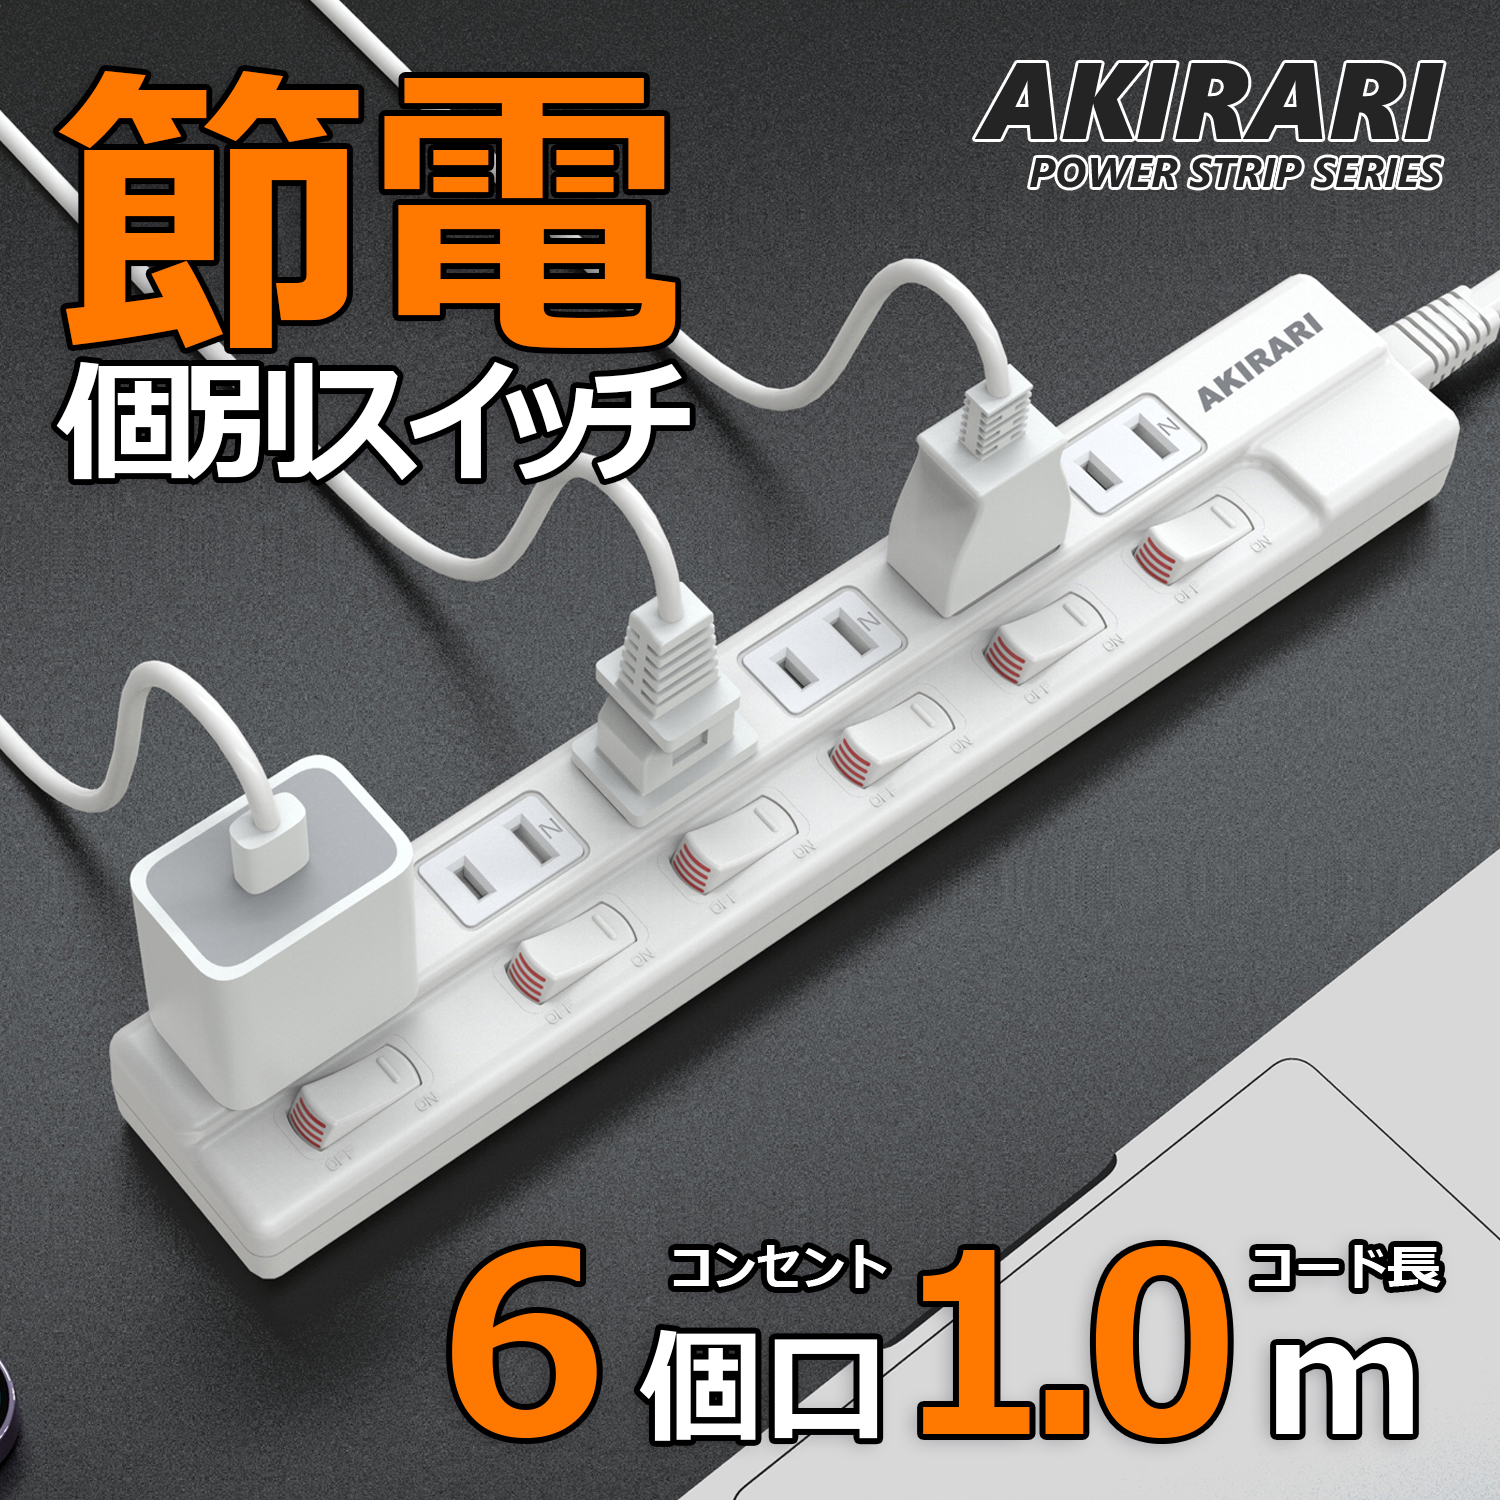 |.. comfort * wiring easy to do | power supply tap outlet plug divergence rammer foot extender ge-bru adaptor correspondence swing plug rotation . electro- dust prevention 6 mouth 1m